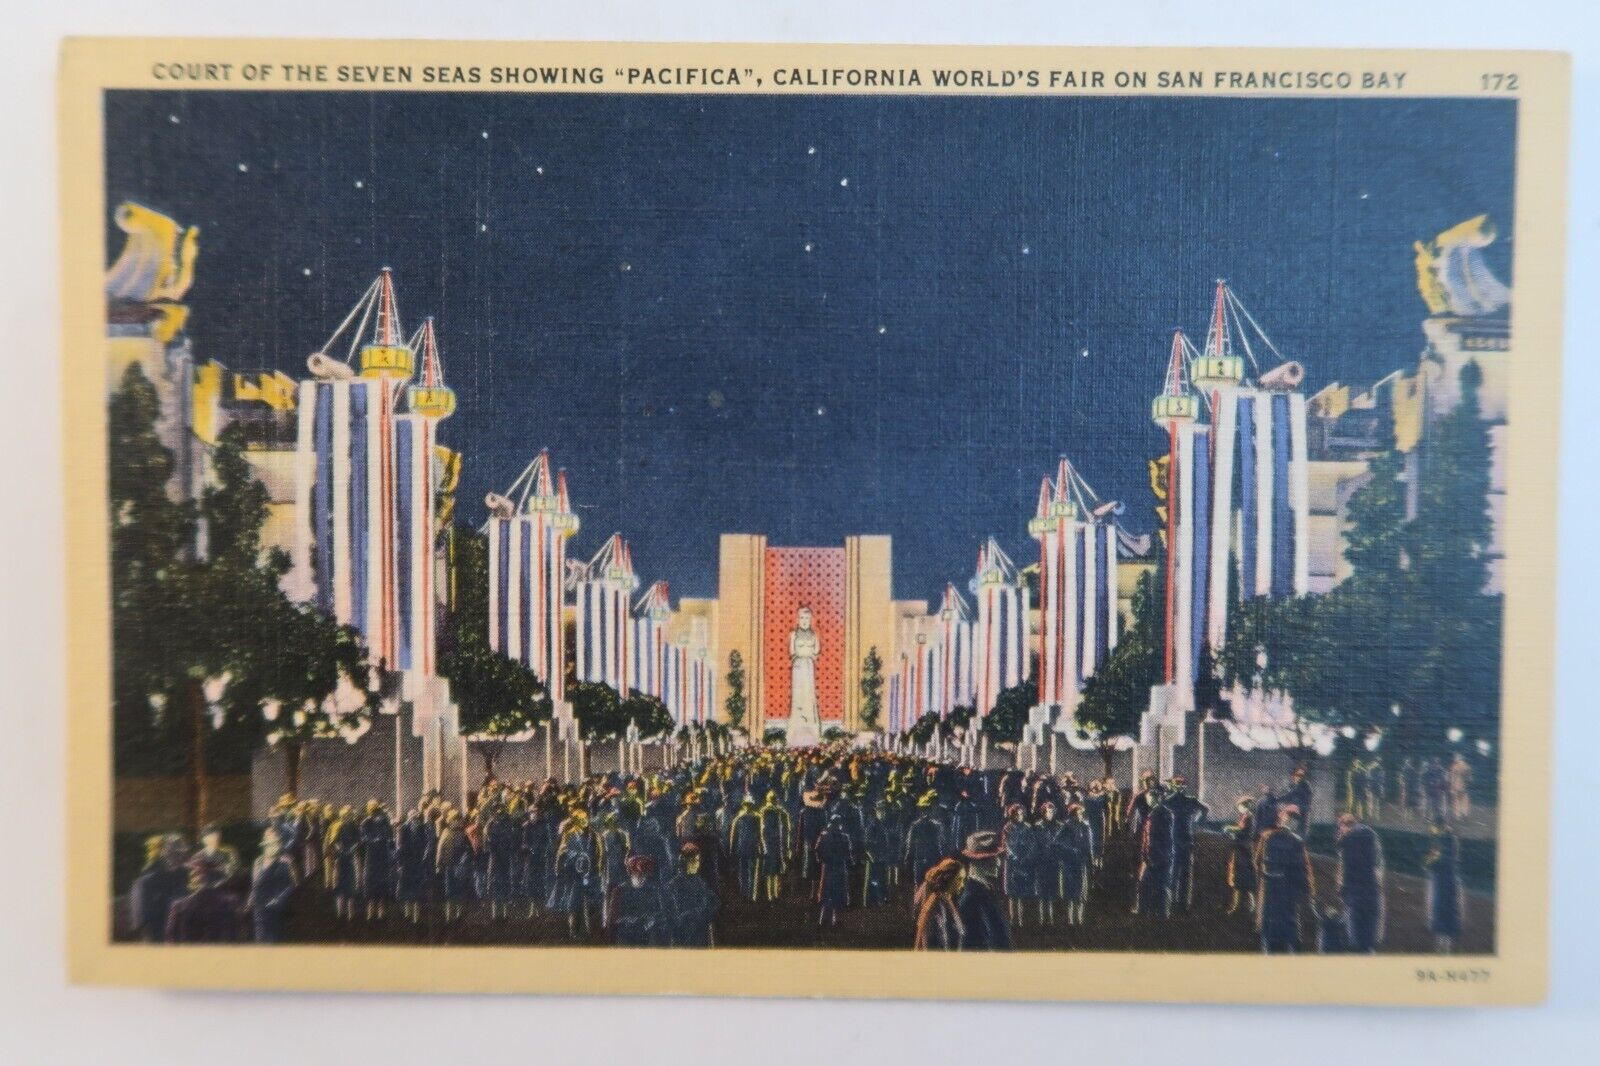 Court of the Seven Seas Showing Pacifica World's Fair Vintage Postcard